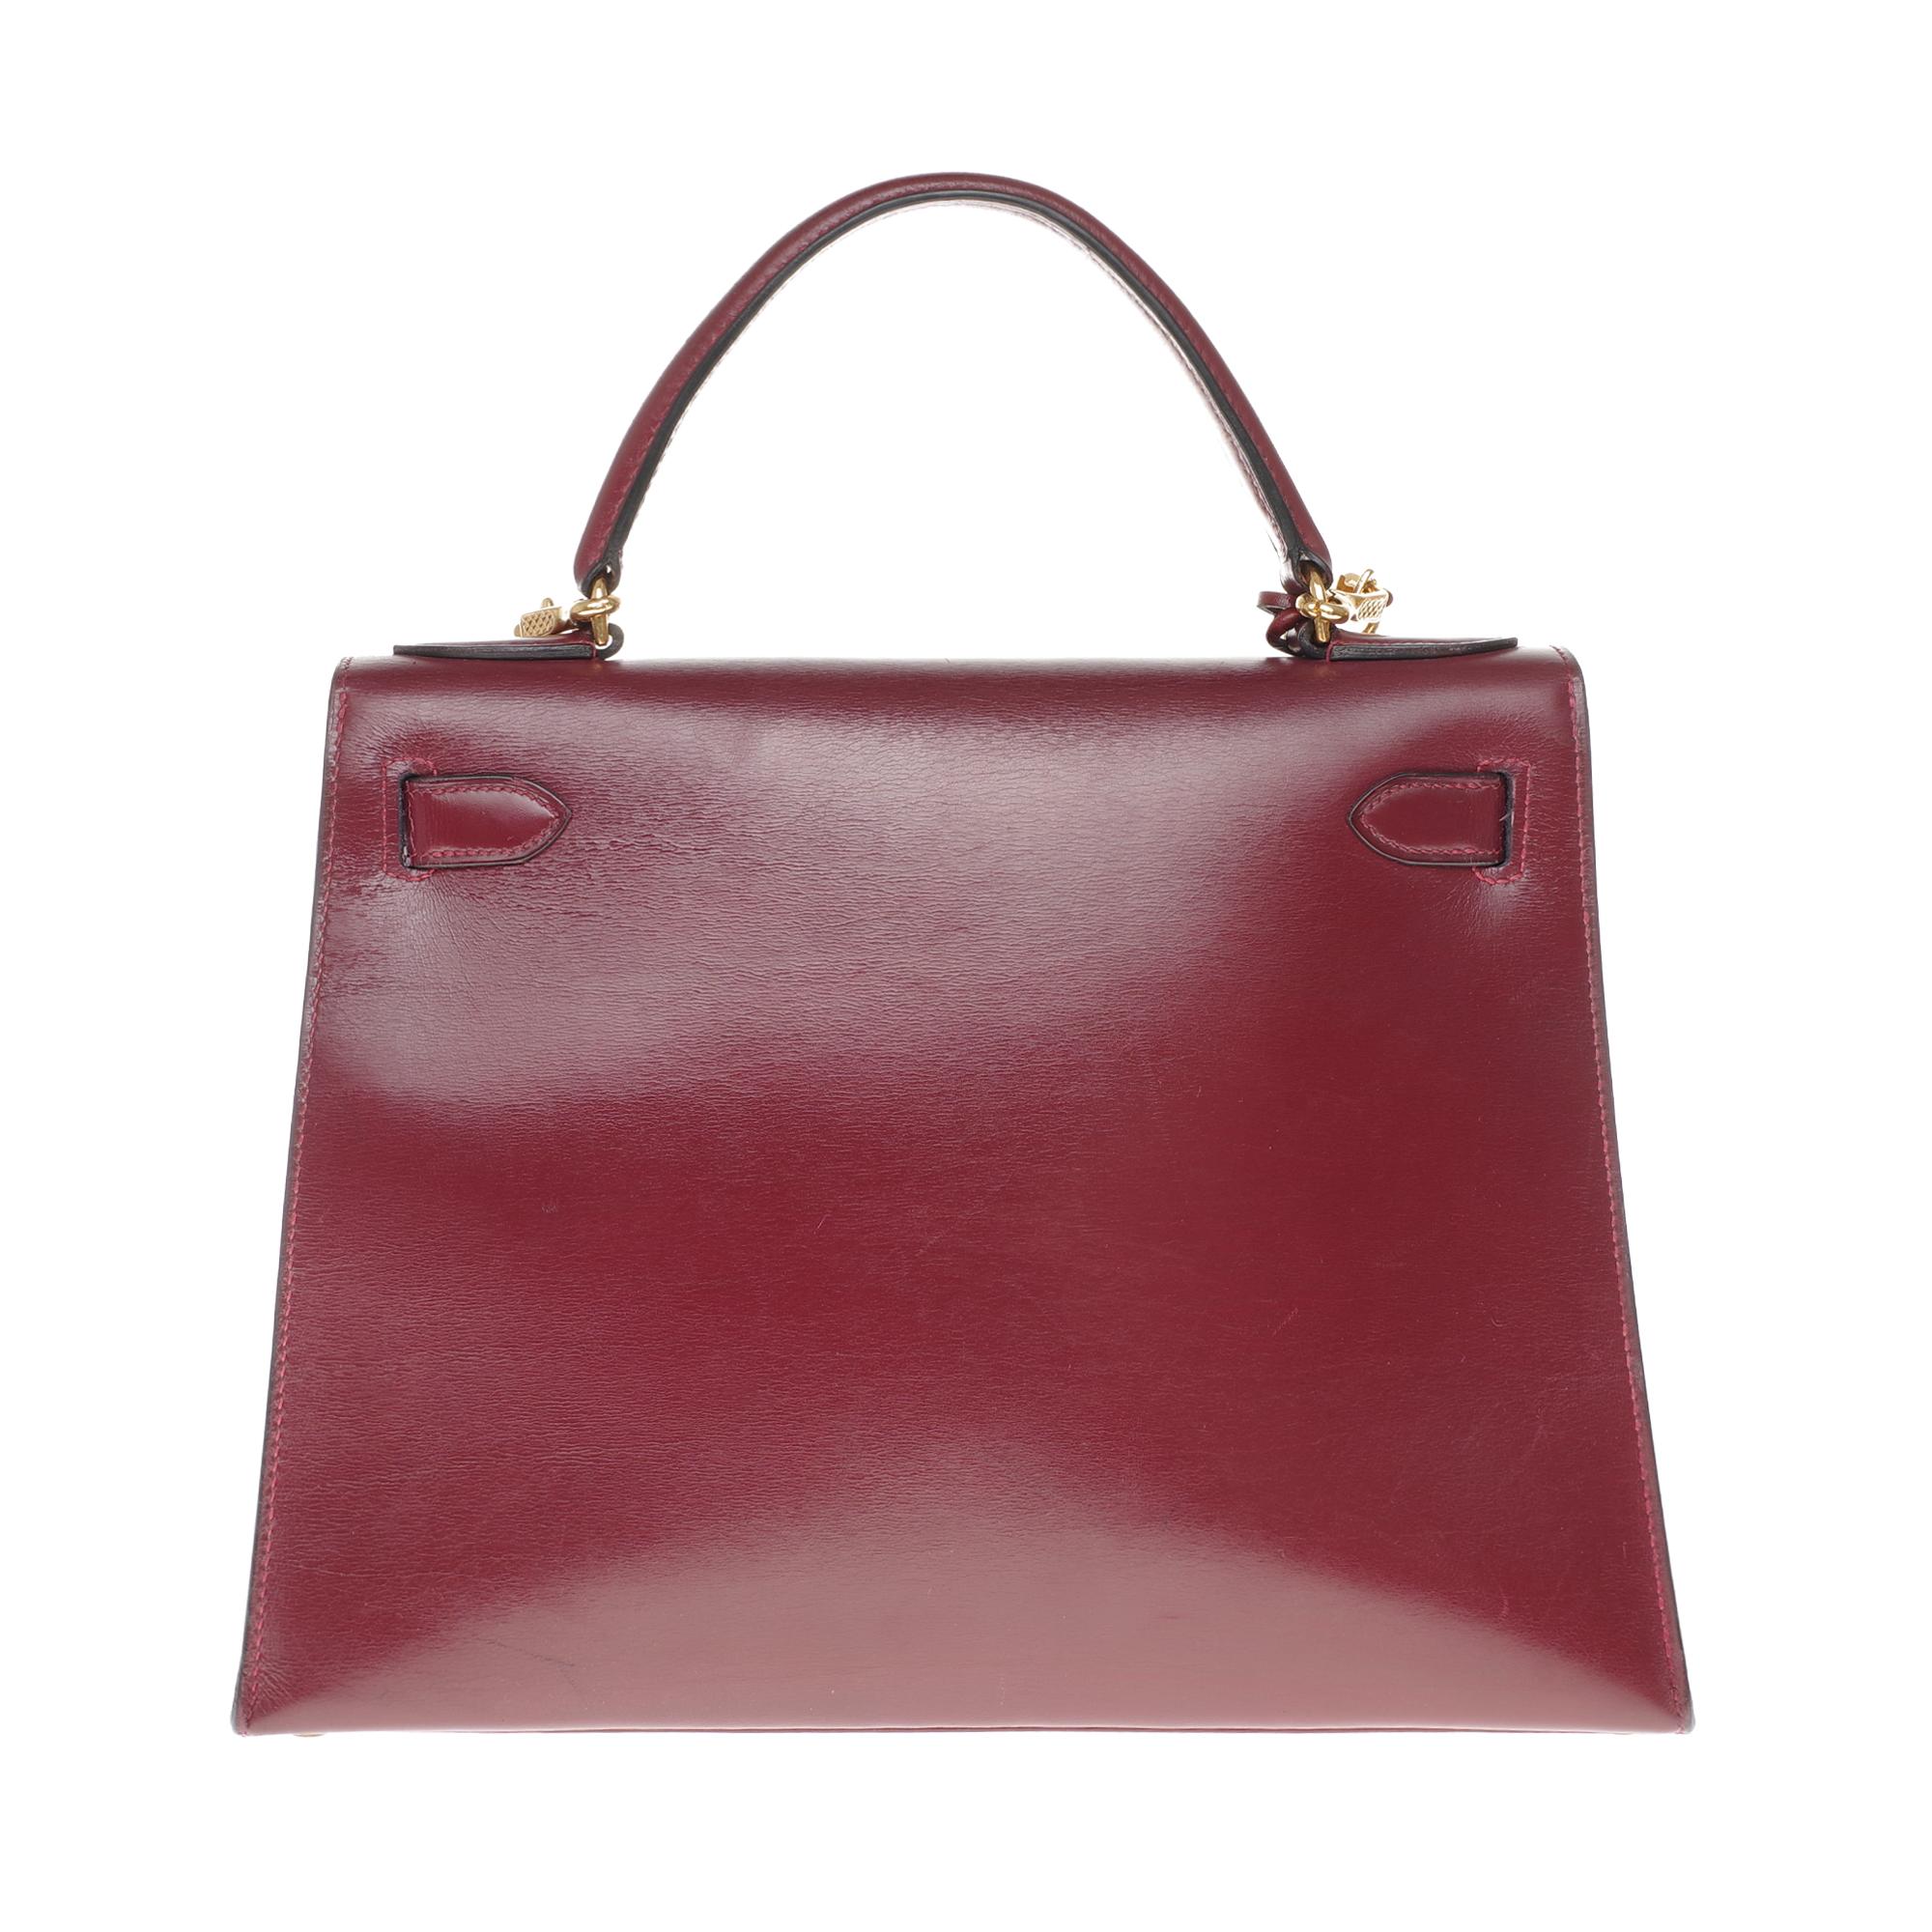 Beautiful Hermes Kelly 28 cm handbag with sellier stitching (handmade) in burgundy calfskin box leather , burgundy leather box shoulder strap (not signed by Hermès), gold plated metal hardware, burgundy leather handle for carrying or shoulder